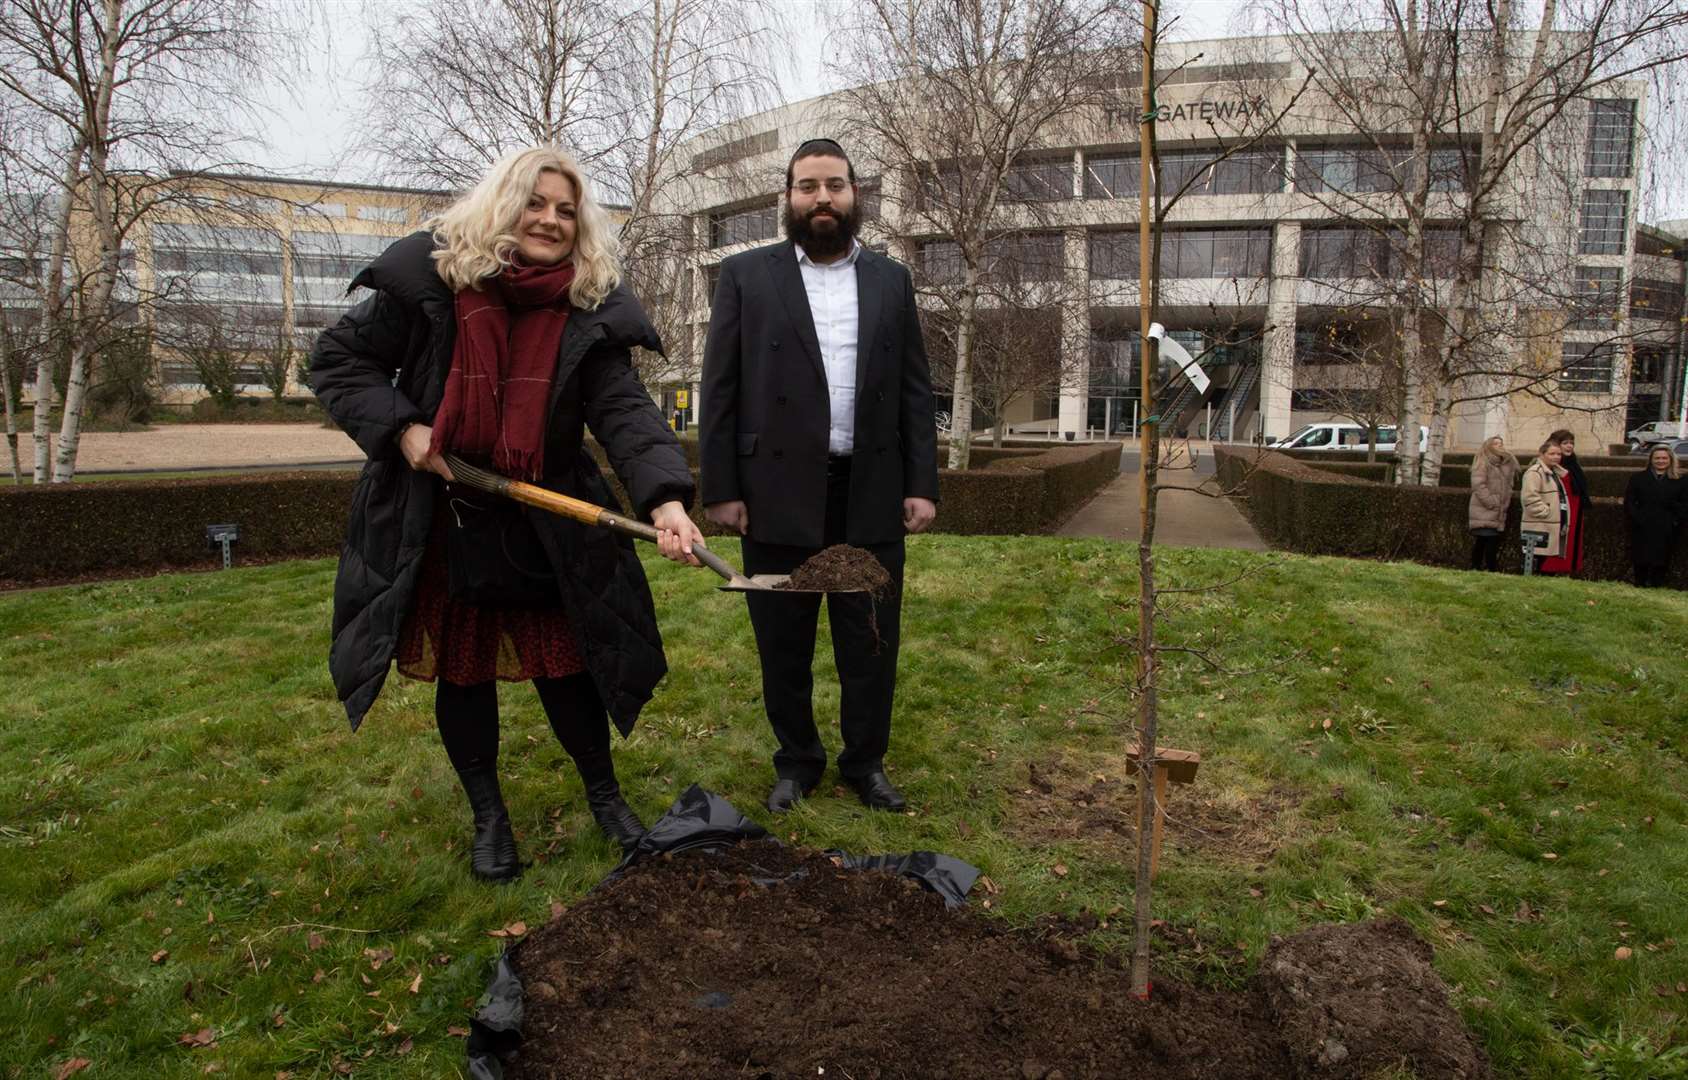 The planting ceremony with Florina Harapcea of AJR and Mayer Schreiber, chief executive of Discovery Park. Picture: Andy Jones/Discovery Park